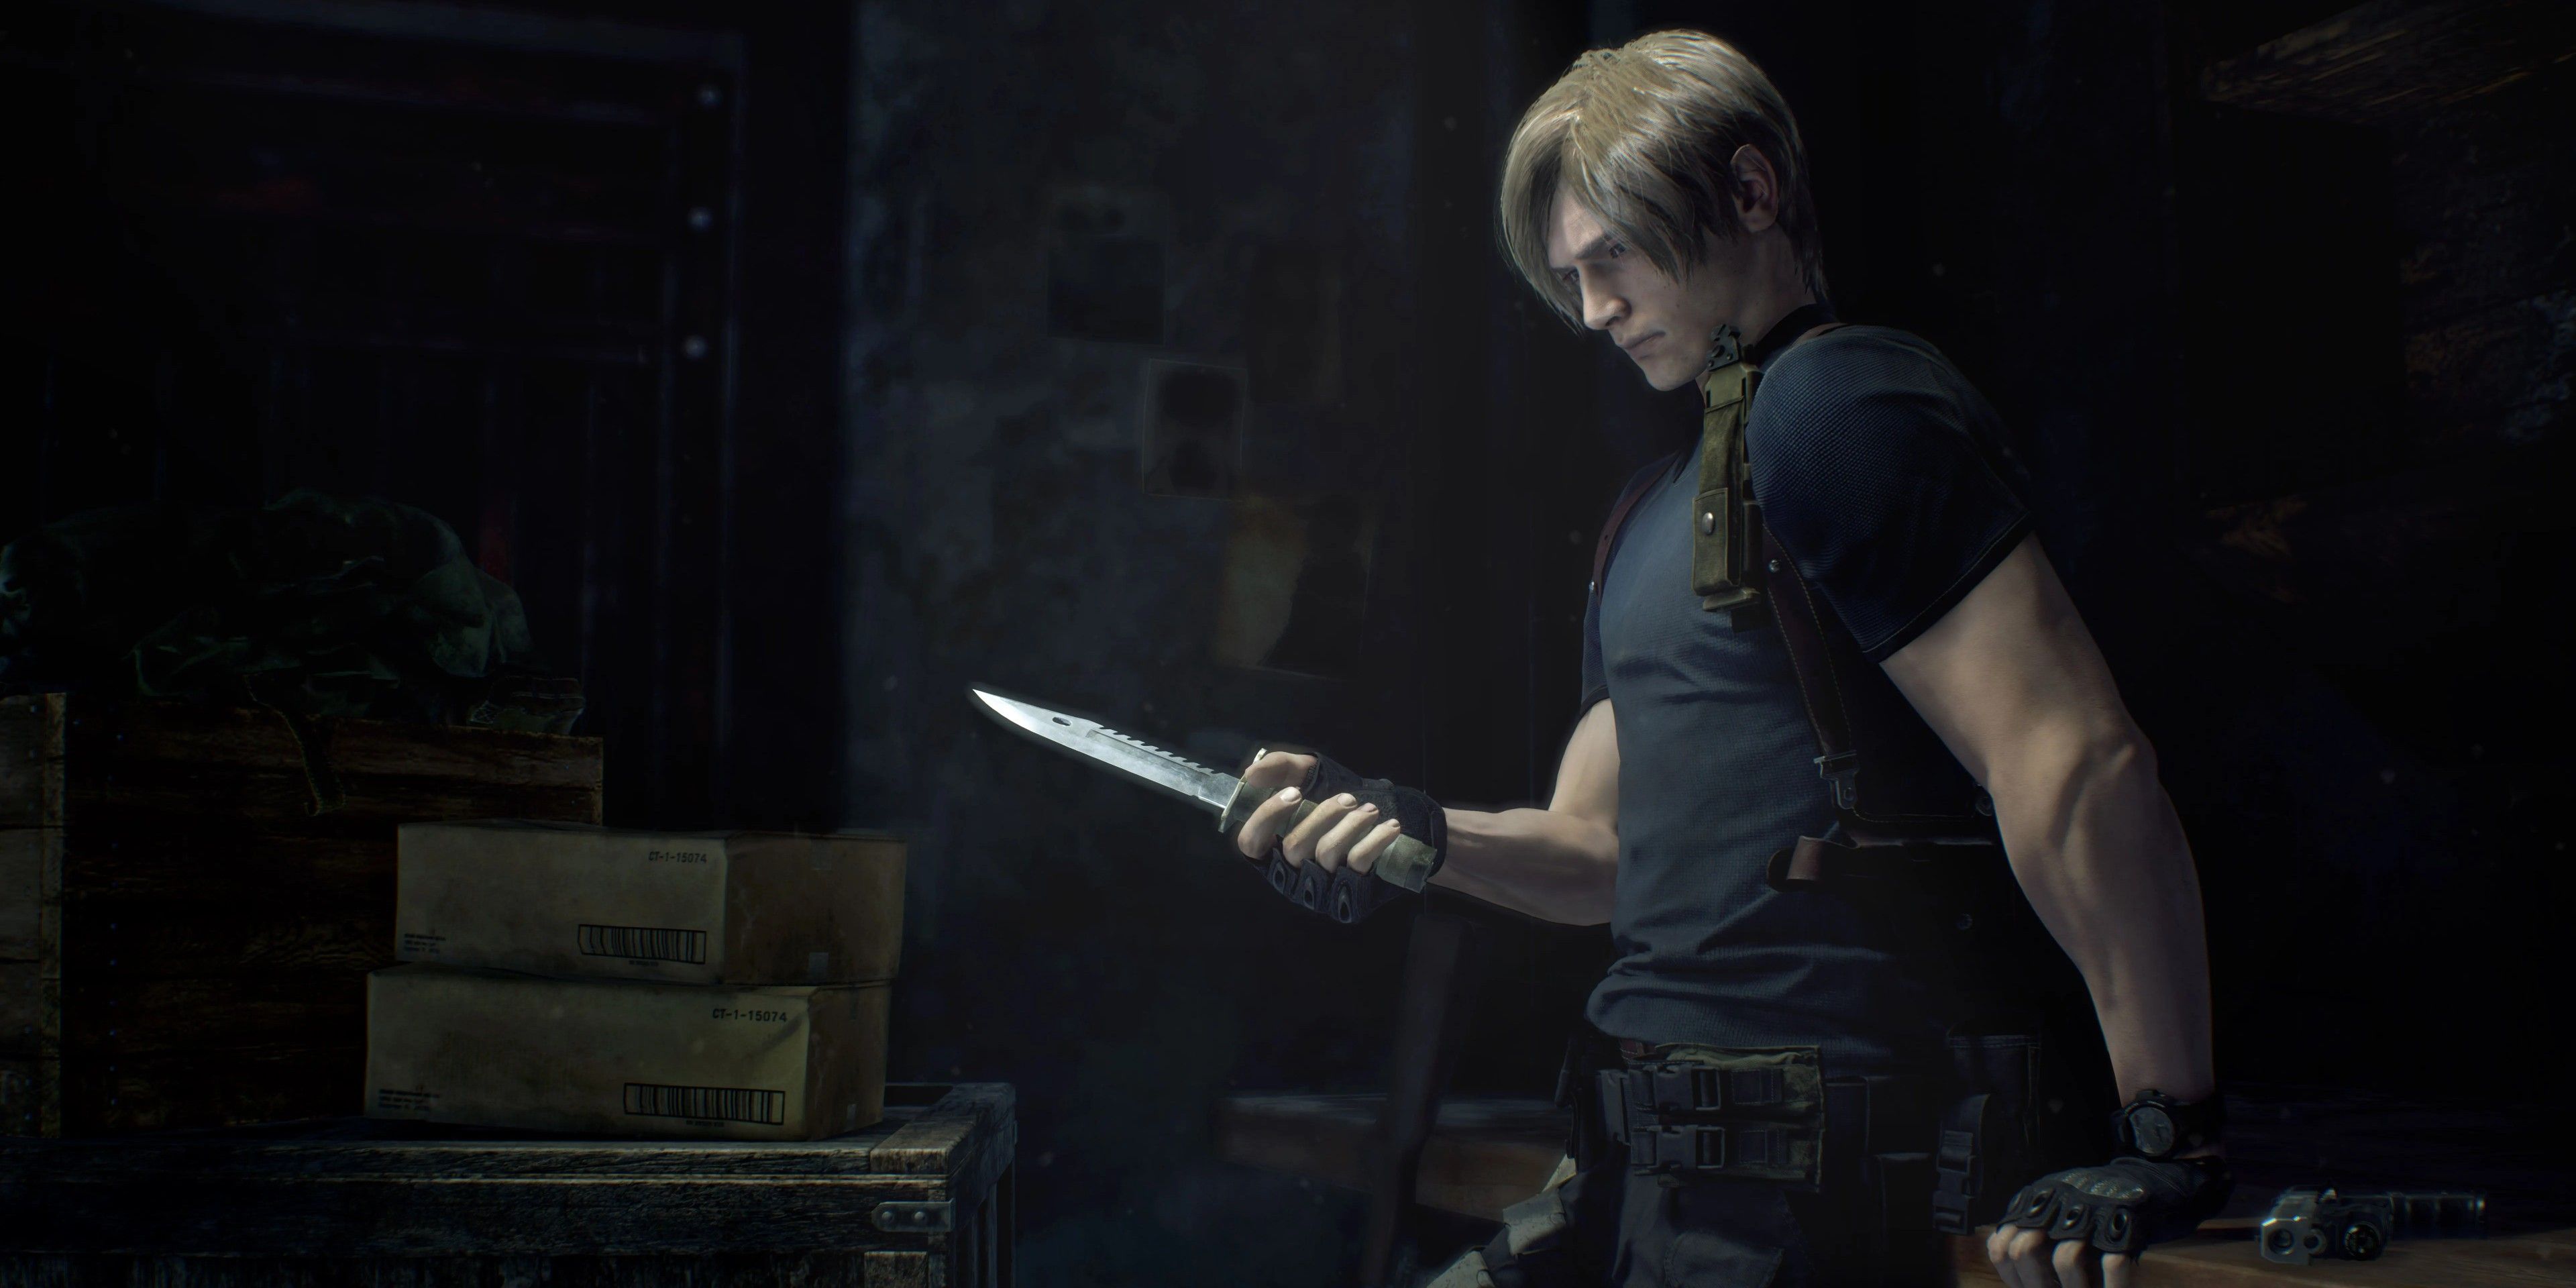 Leon examines a knife in the Resident Evil 4 remake.